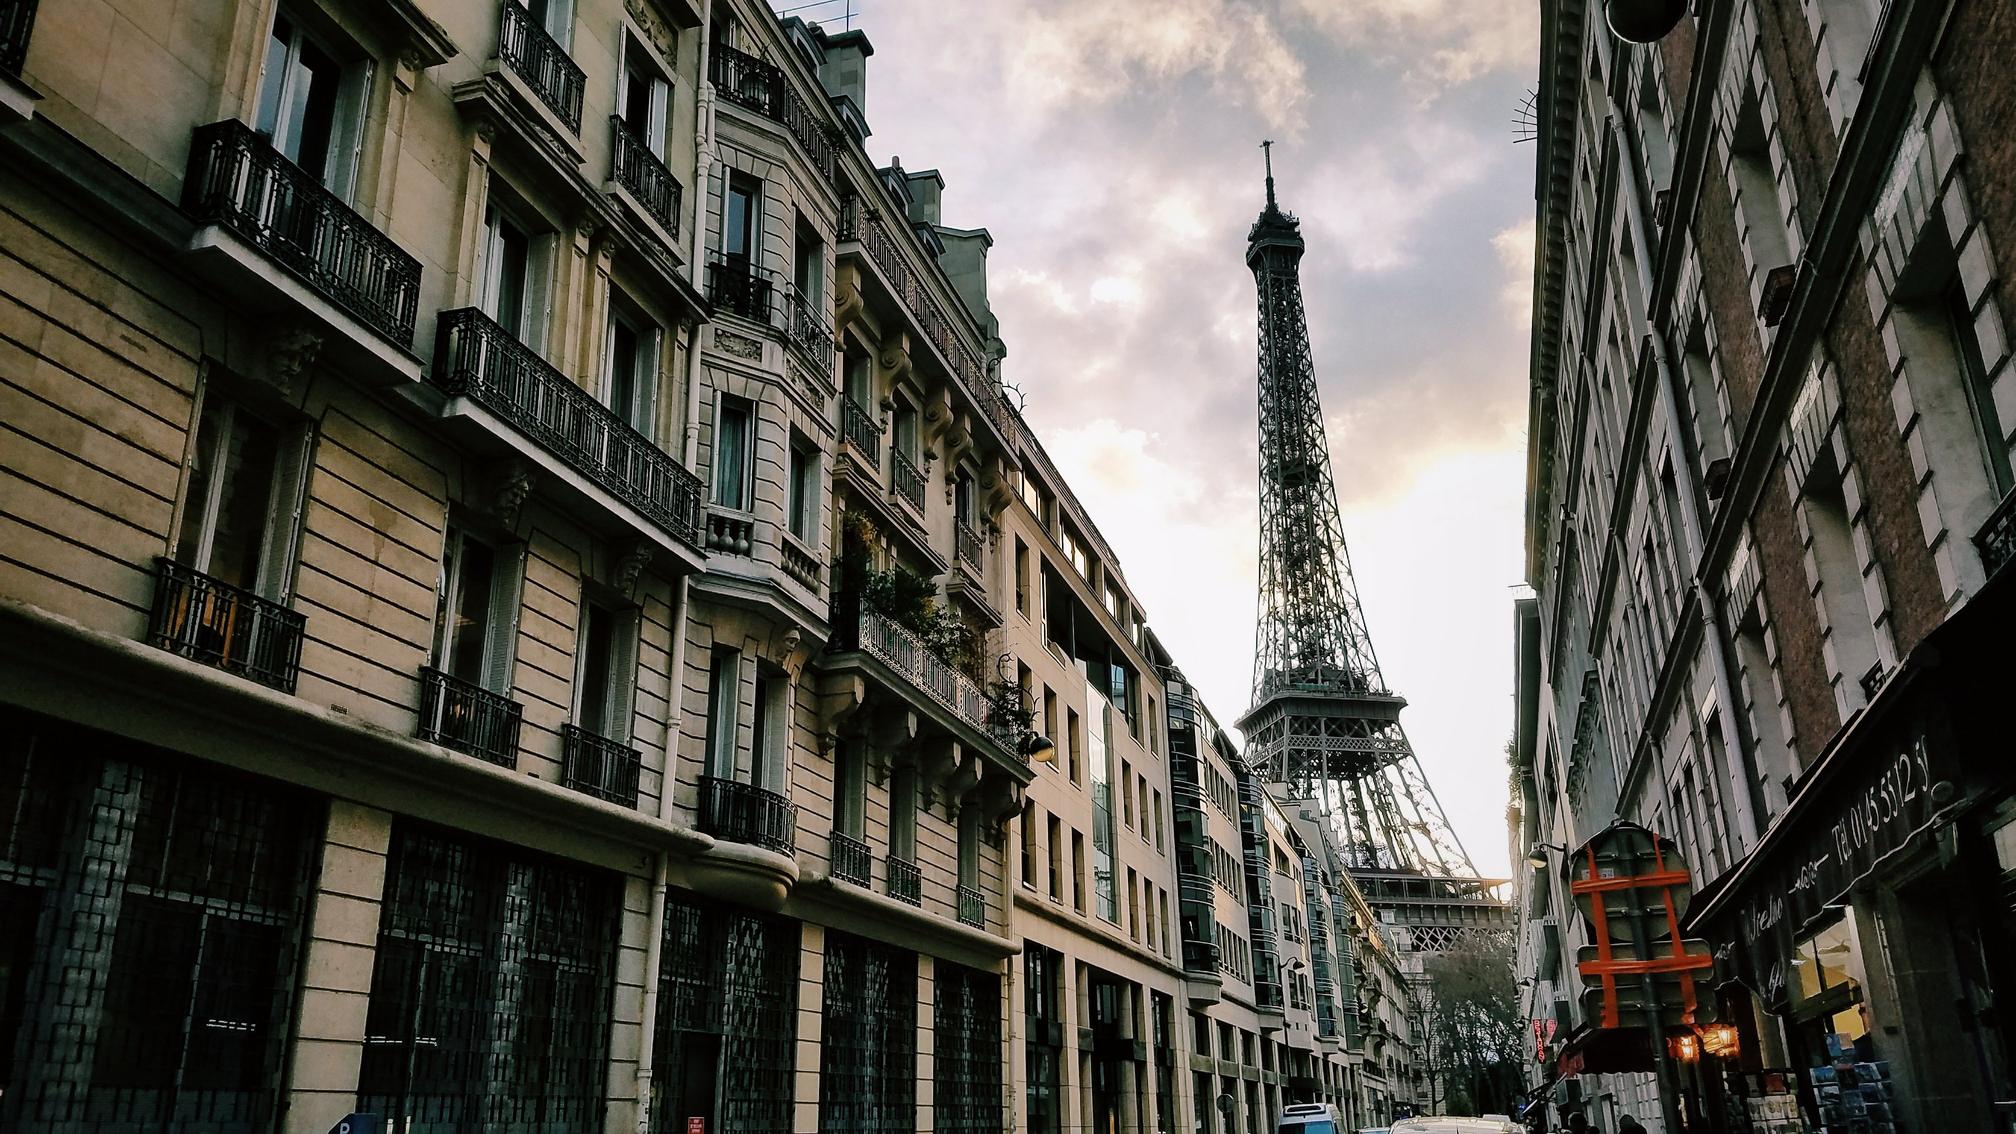 The Eiffel Tower as seen down a long street in the 7ème arrondissement, its home district